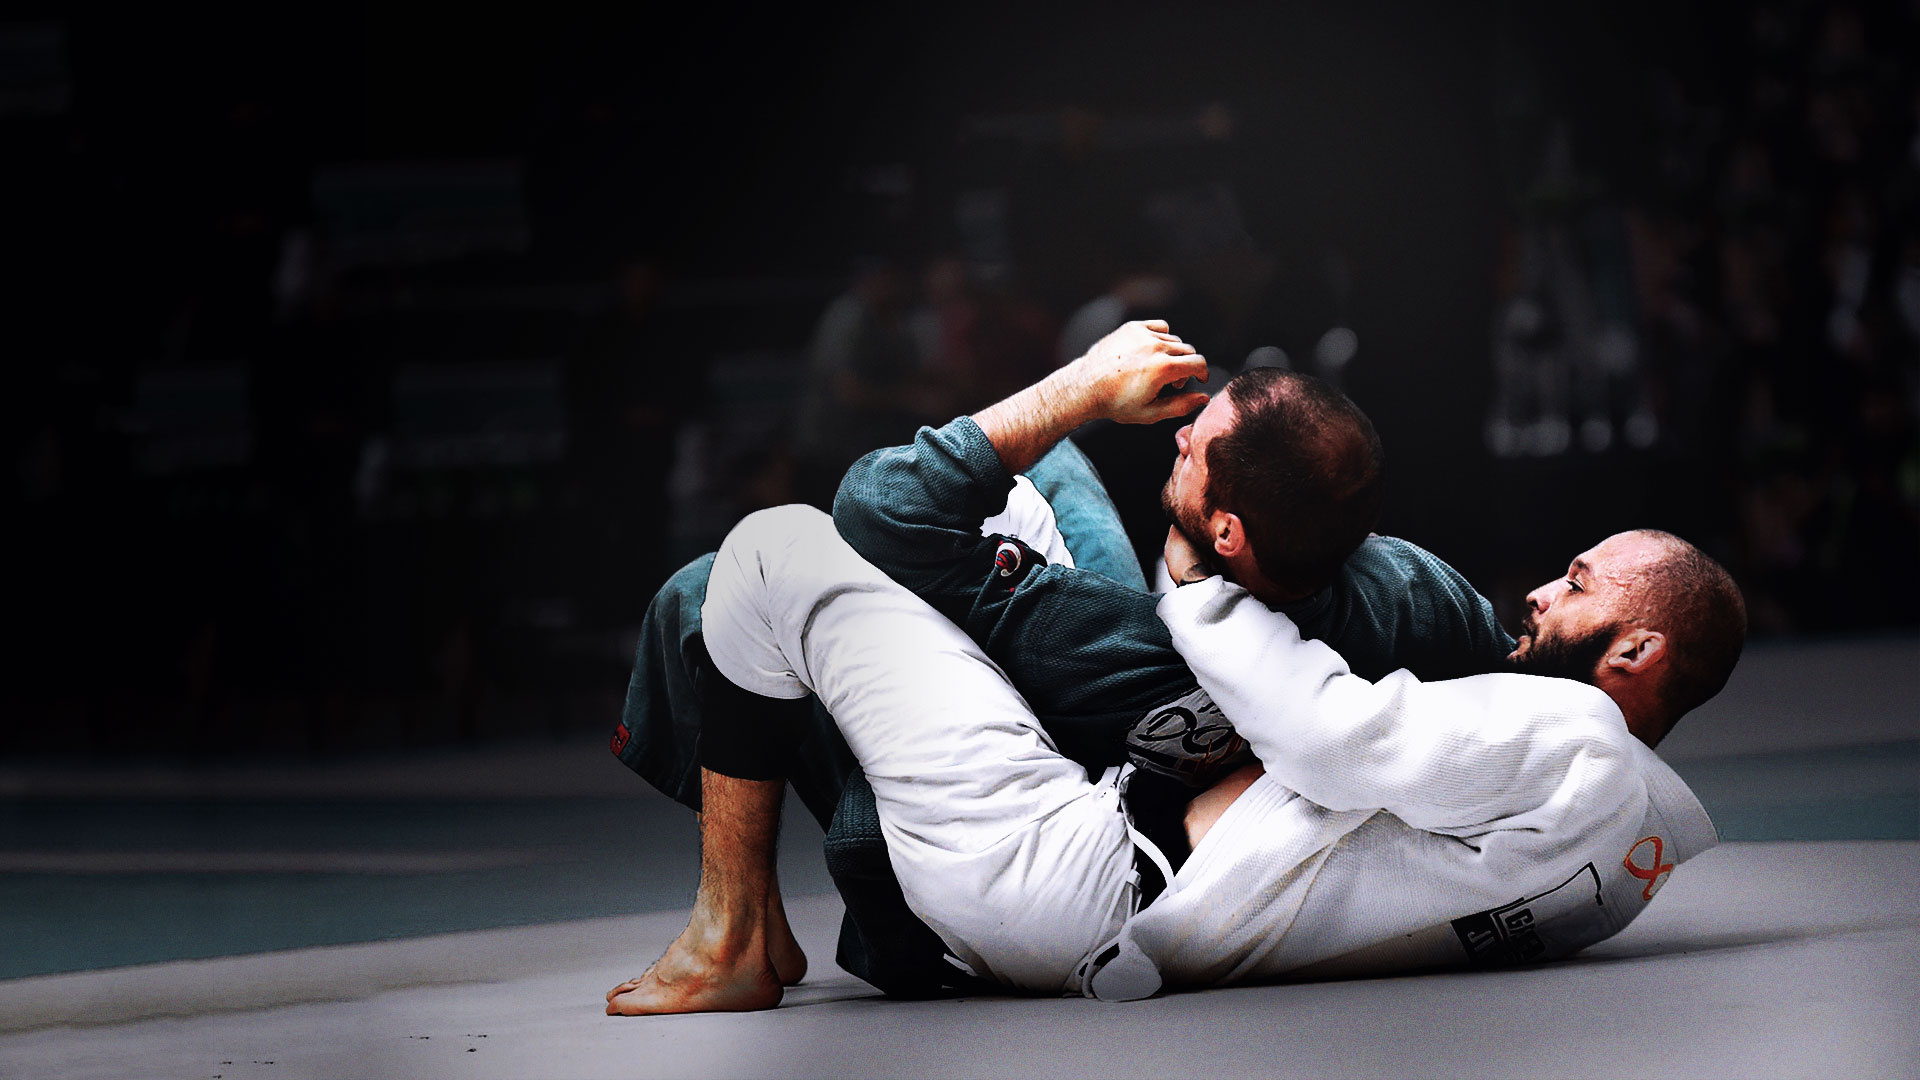 Jiu-jitsu: Kata training, Sparring and ground fighting, Martial Arts and Fitness. 1920x1080 Full HD Background.